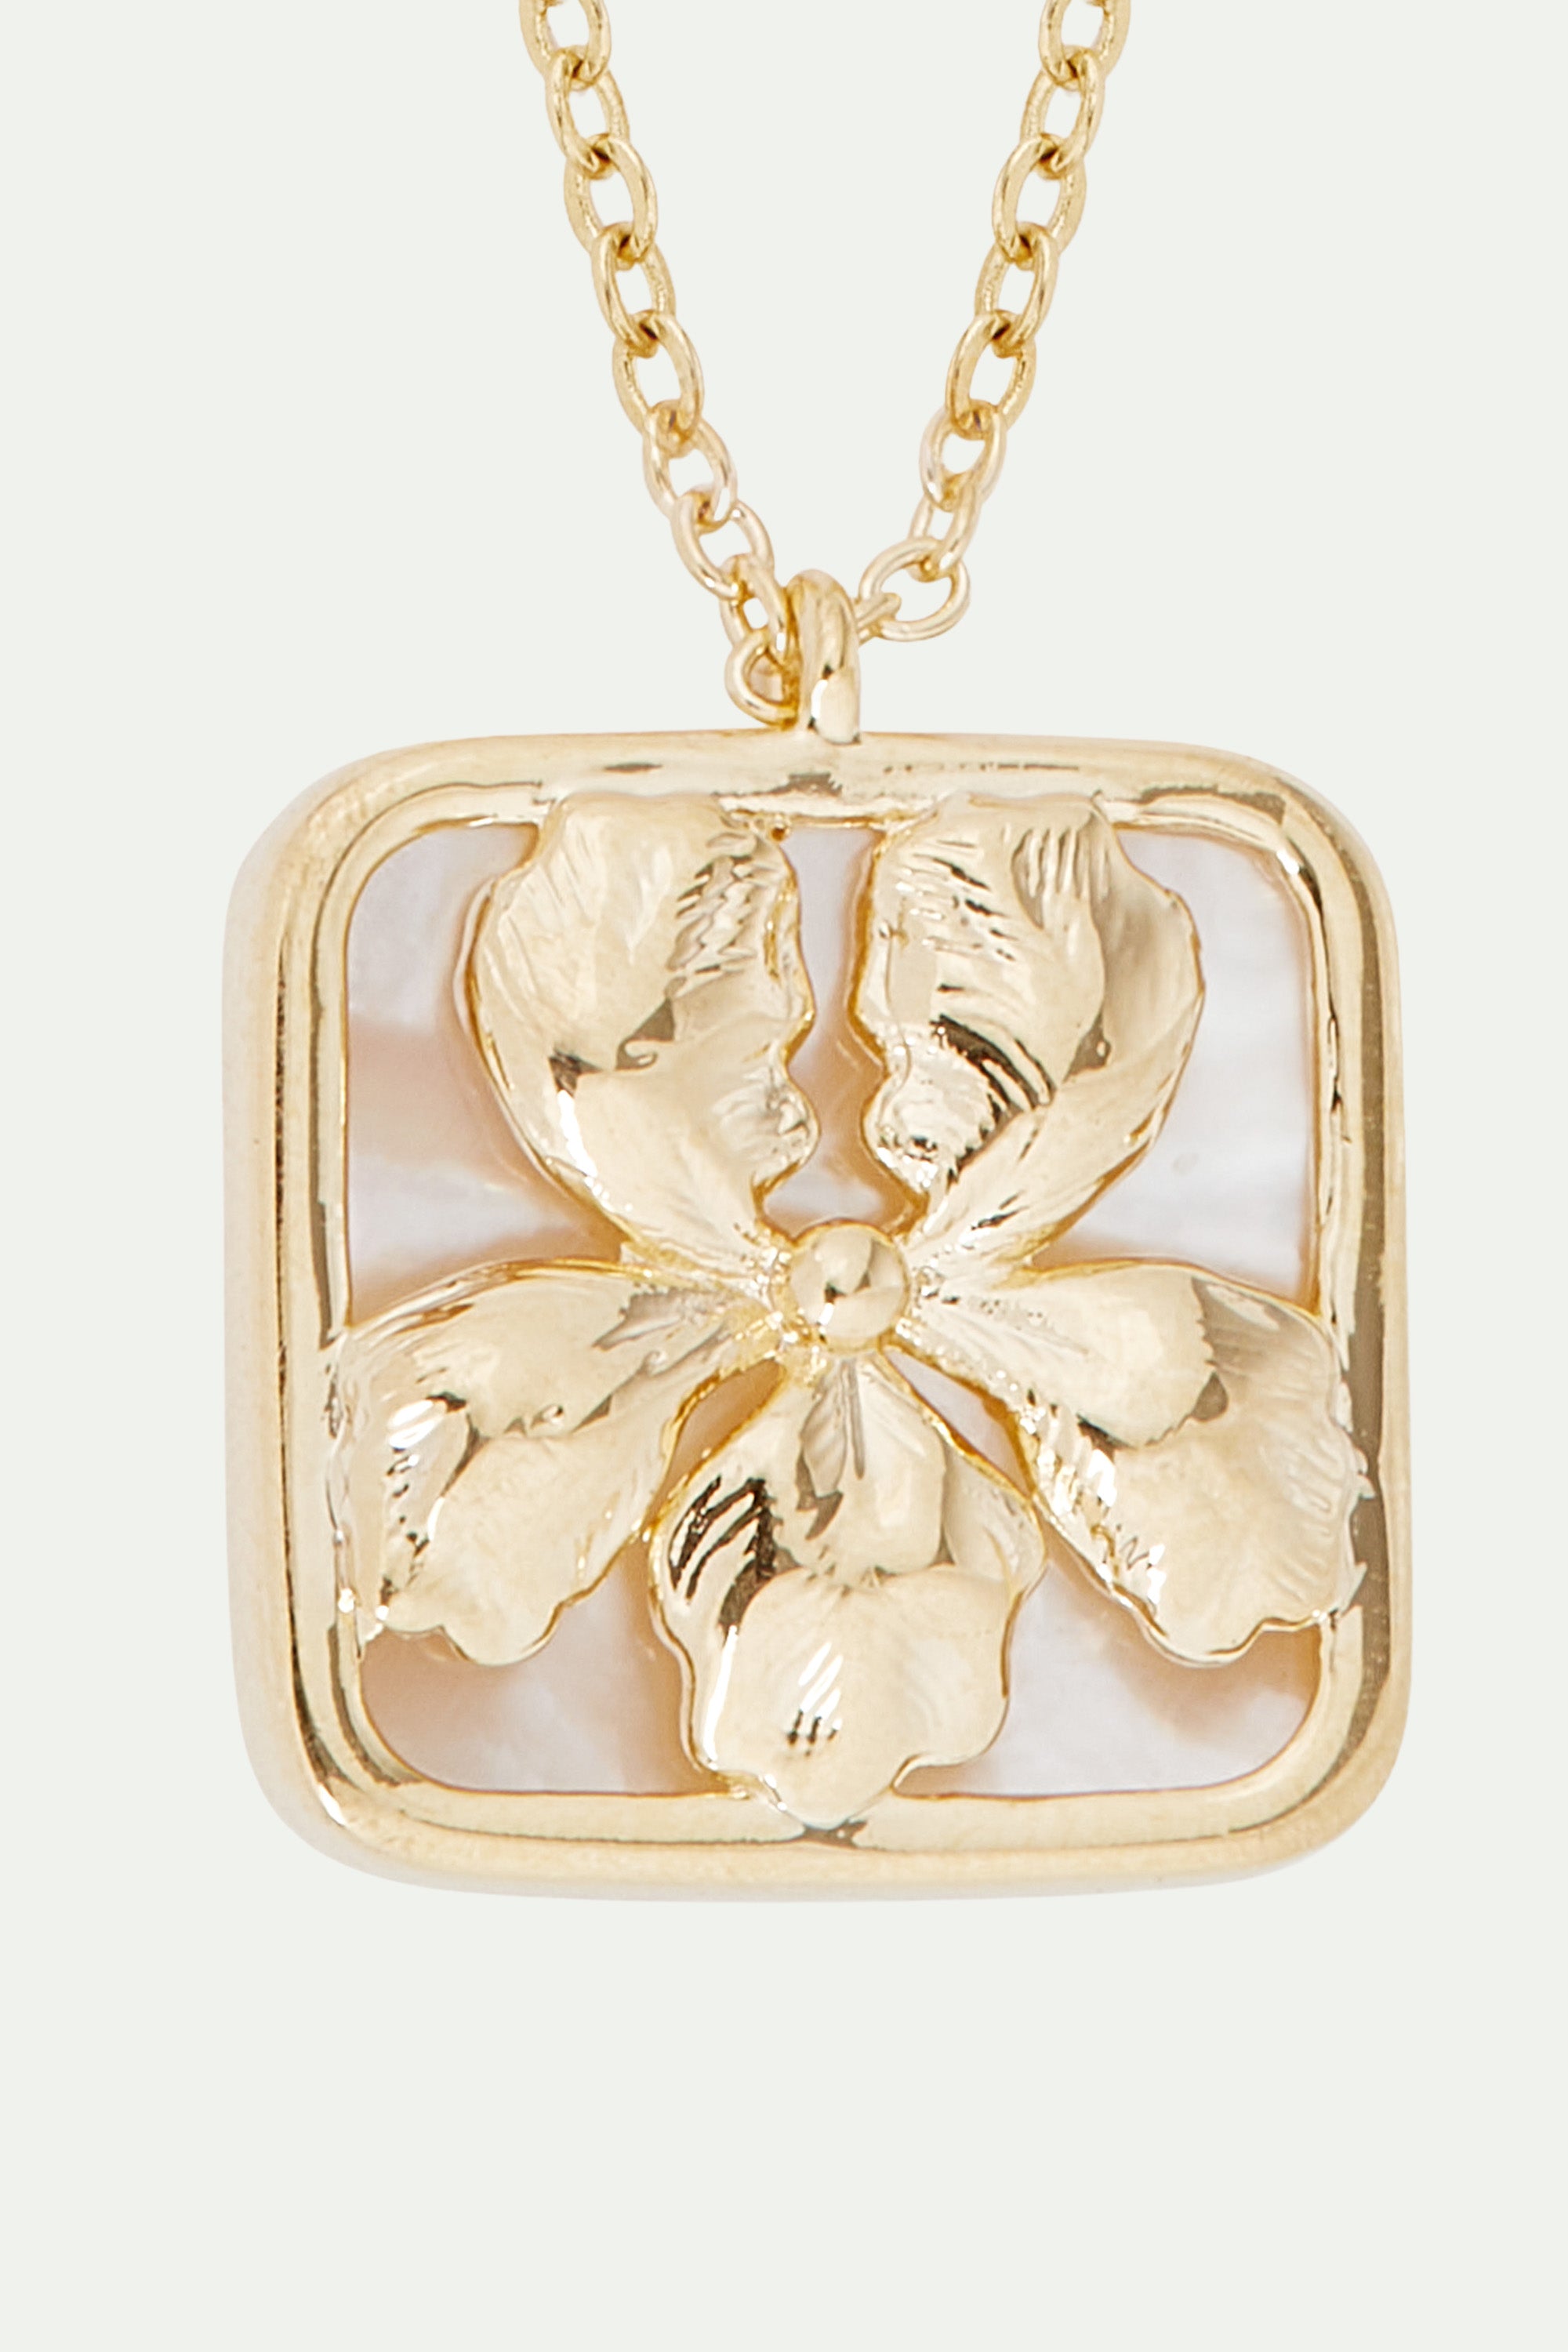 Iris on mother of pearl plate pendant necklace